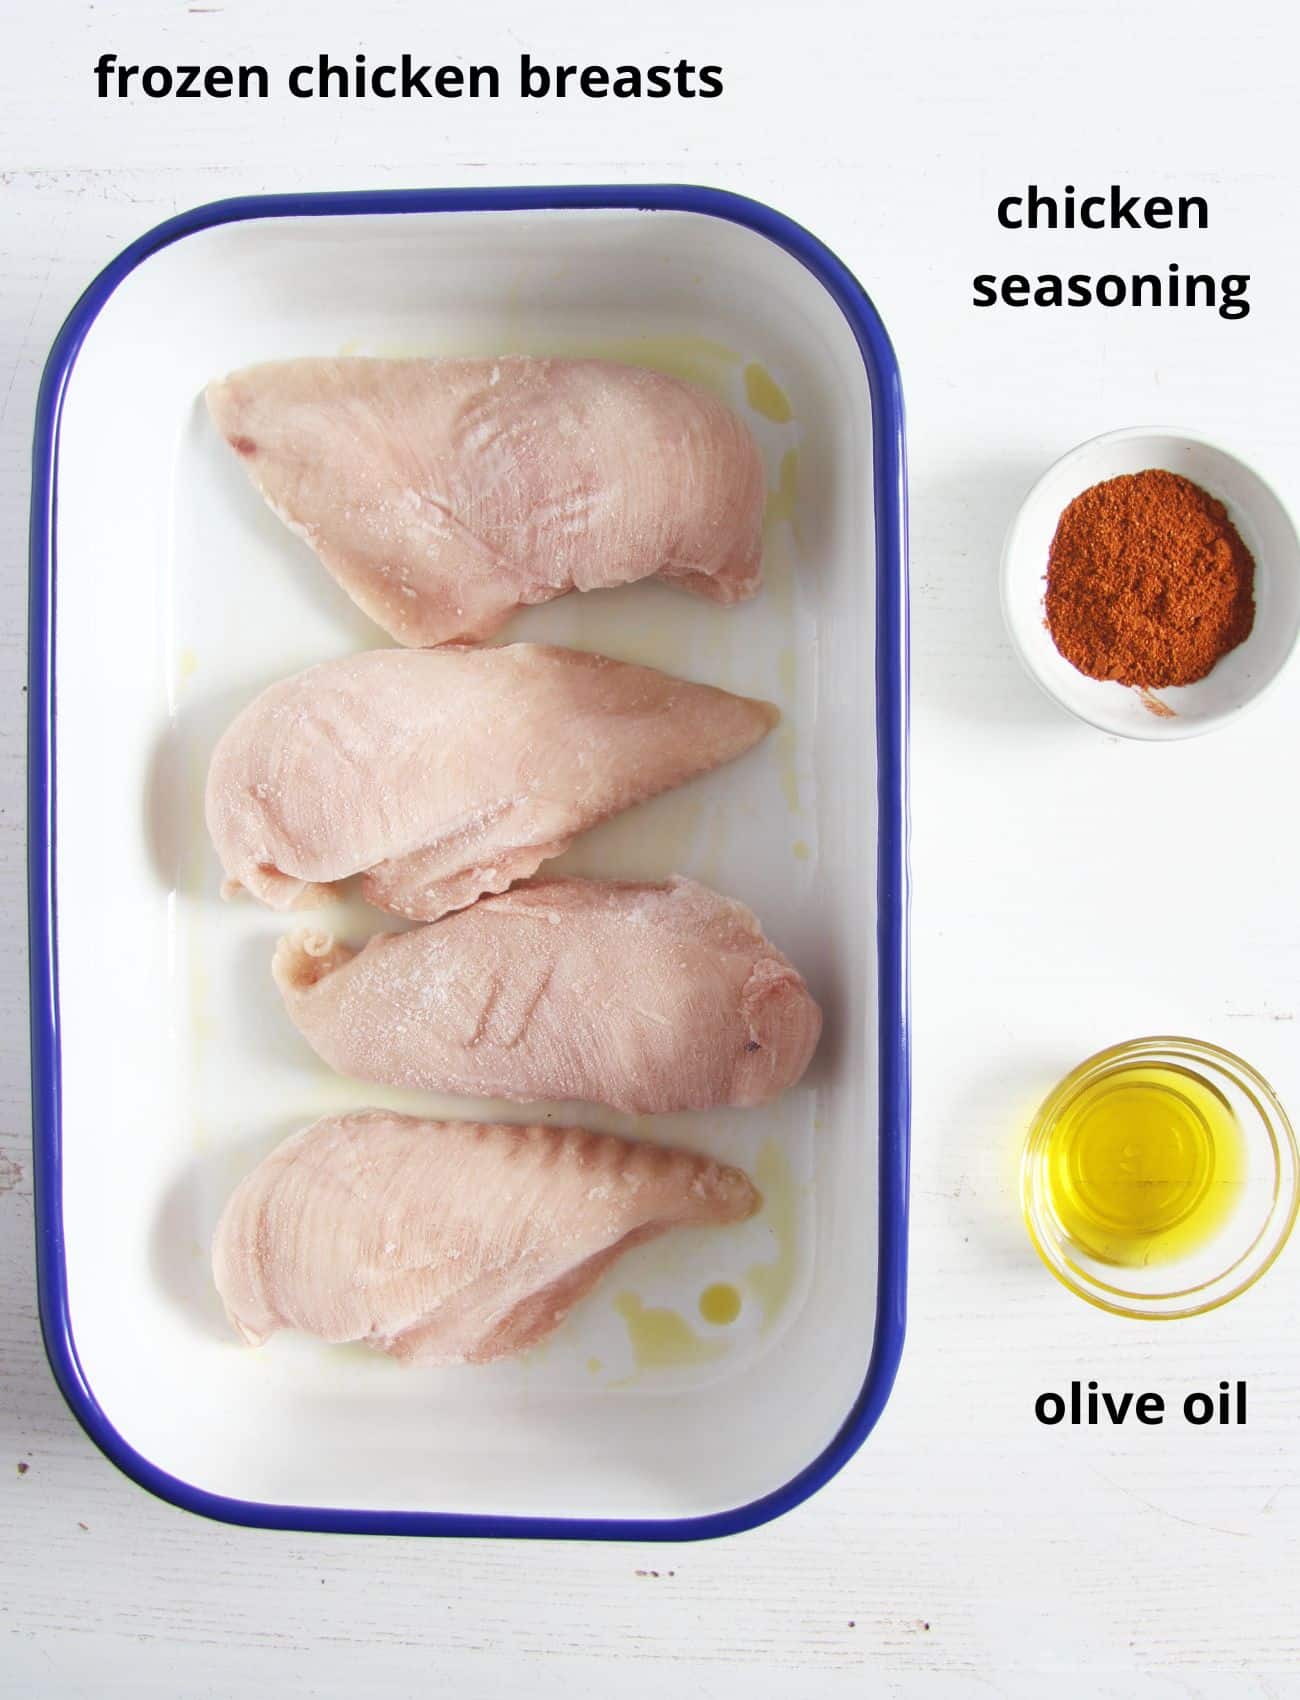 raw chicken breast pieces in a baking dish, one bowl of seasoning and one with oil.